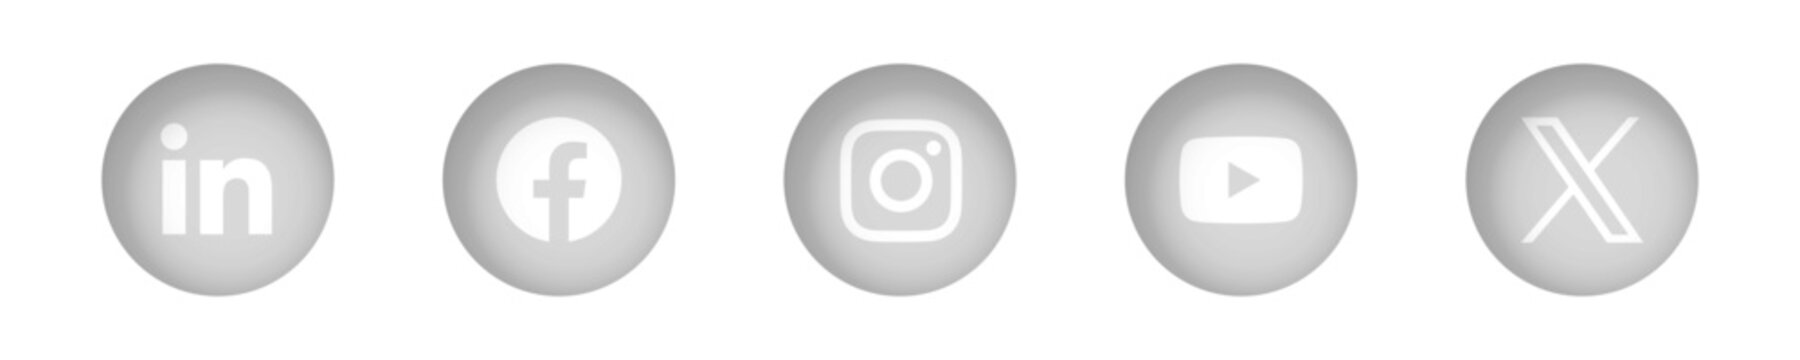 Social media app icon set. LinkedIn, Facebook, Instagram, Youtube and X, former Twitter. Circle button with inner dropped shadow vector icons.